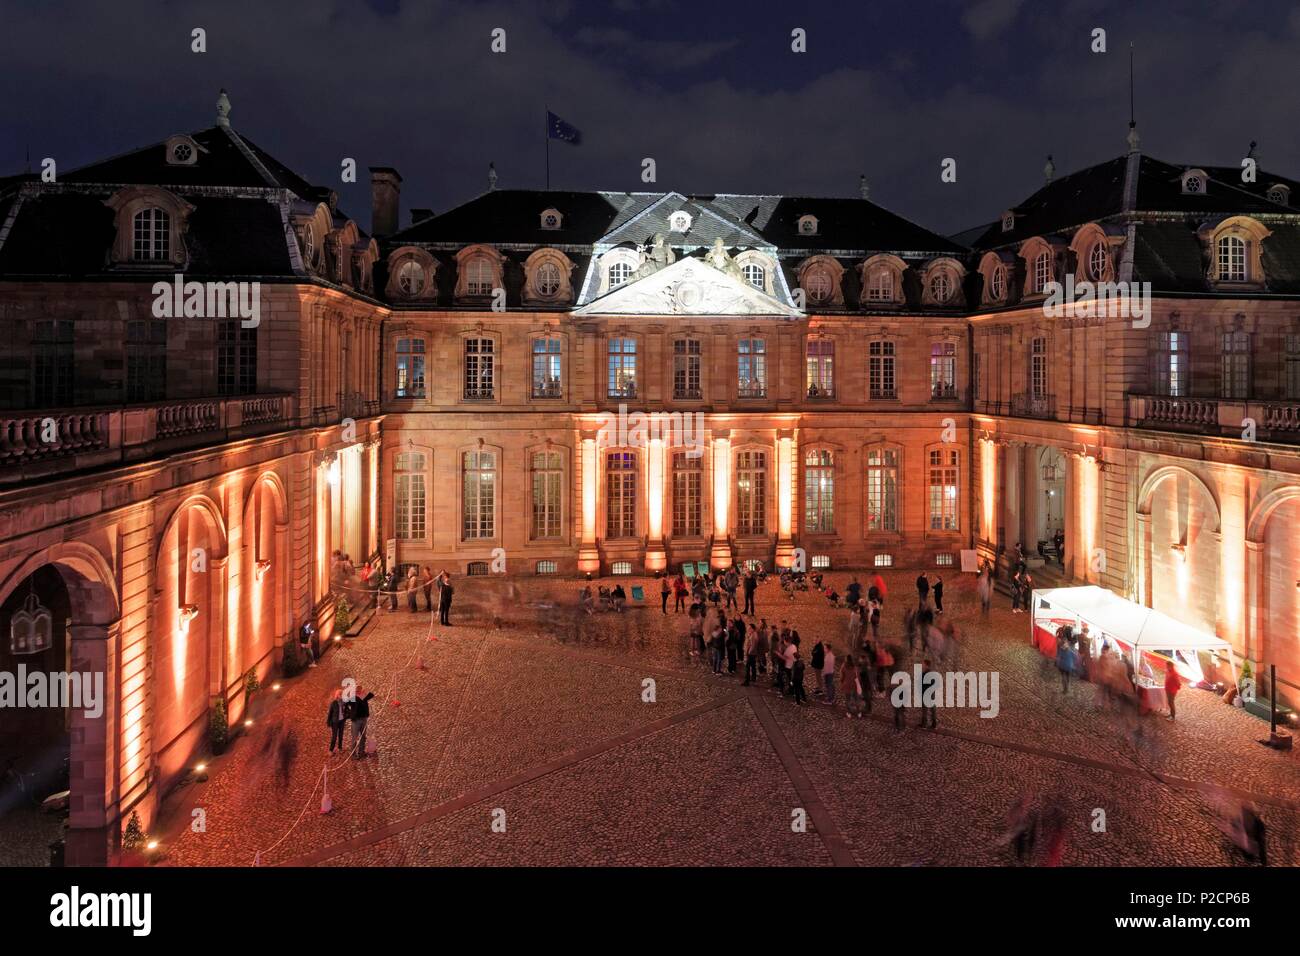 France, Bas Rhin, Strasbourg, old town listed as World Heritage by UNESCO, the Palais des Rohan, which houses the Museum of Decorative Arts, Fine Arts and Archaeology Stock Photo